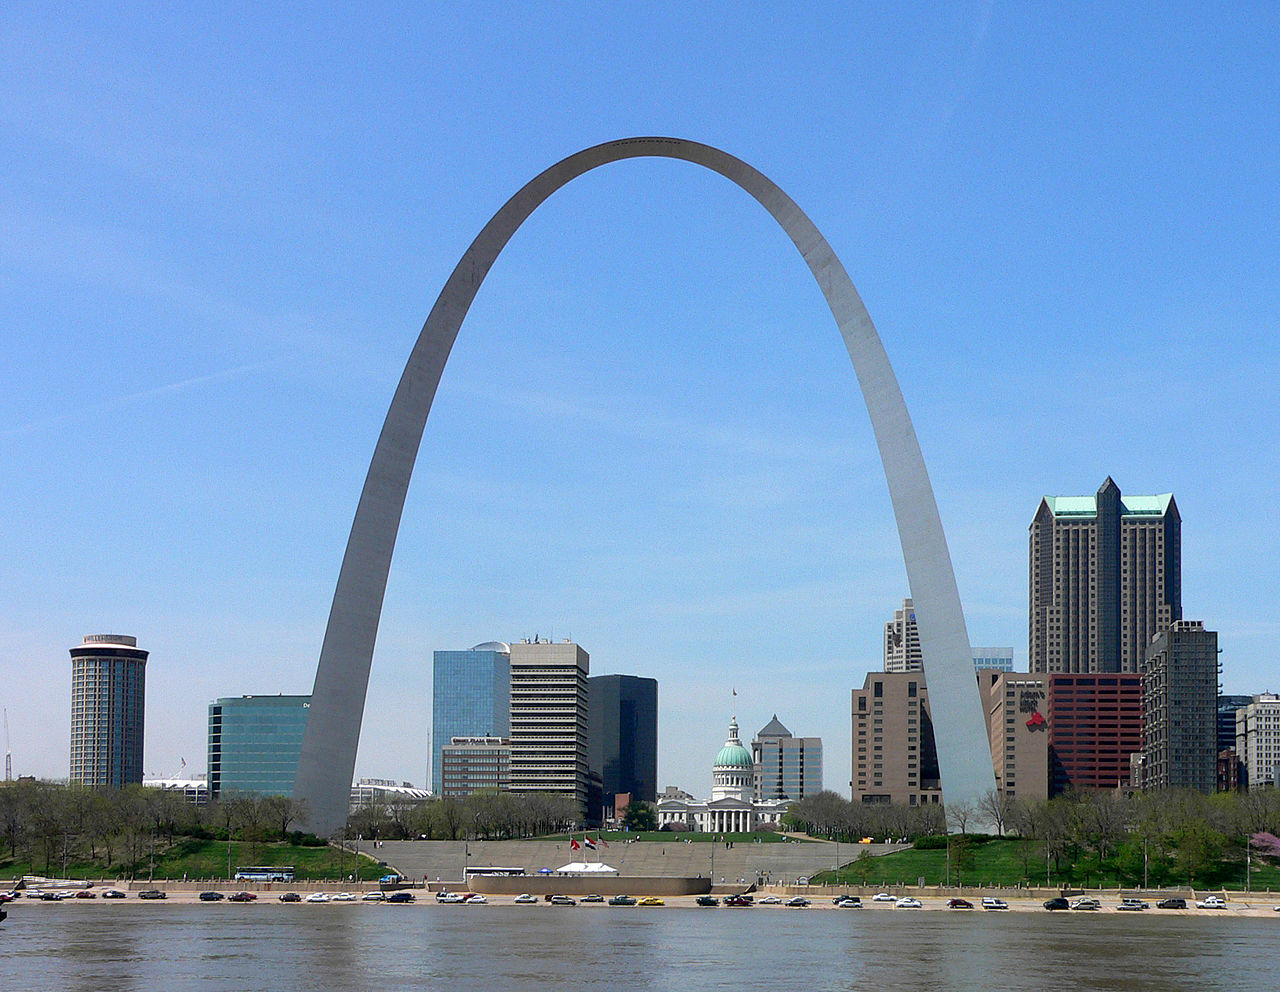 The Gateway Arch, part of the Jefferson National Expansion Memorial in St. Louis, Missouri. (Wikimedia Commons)